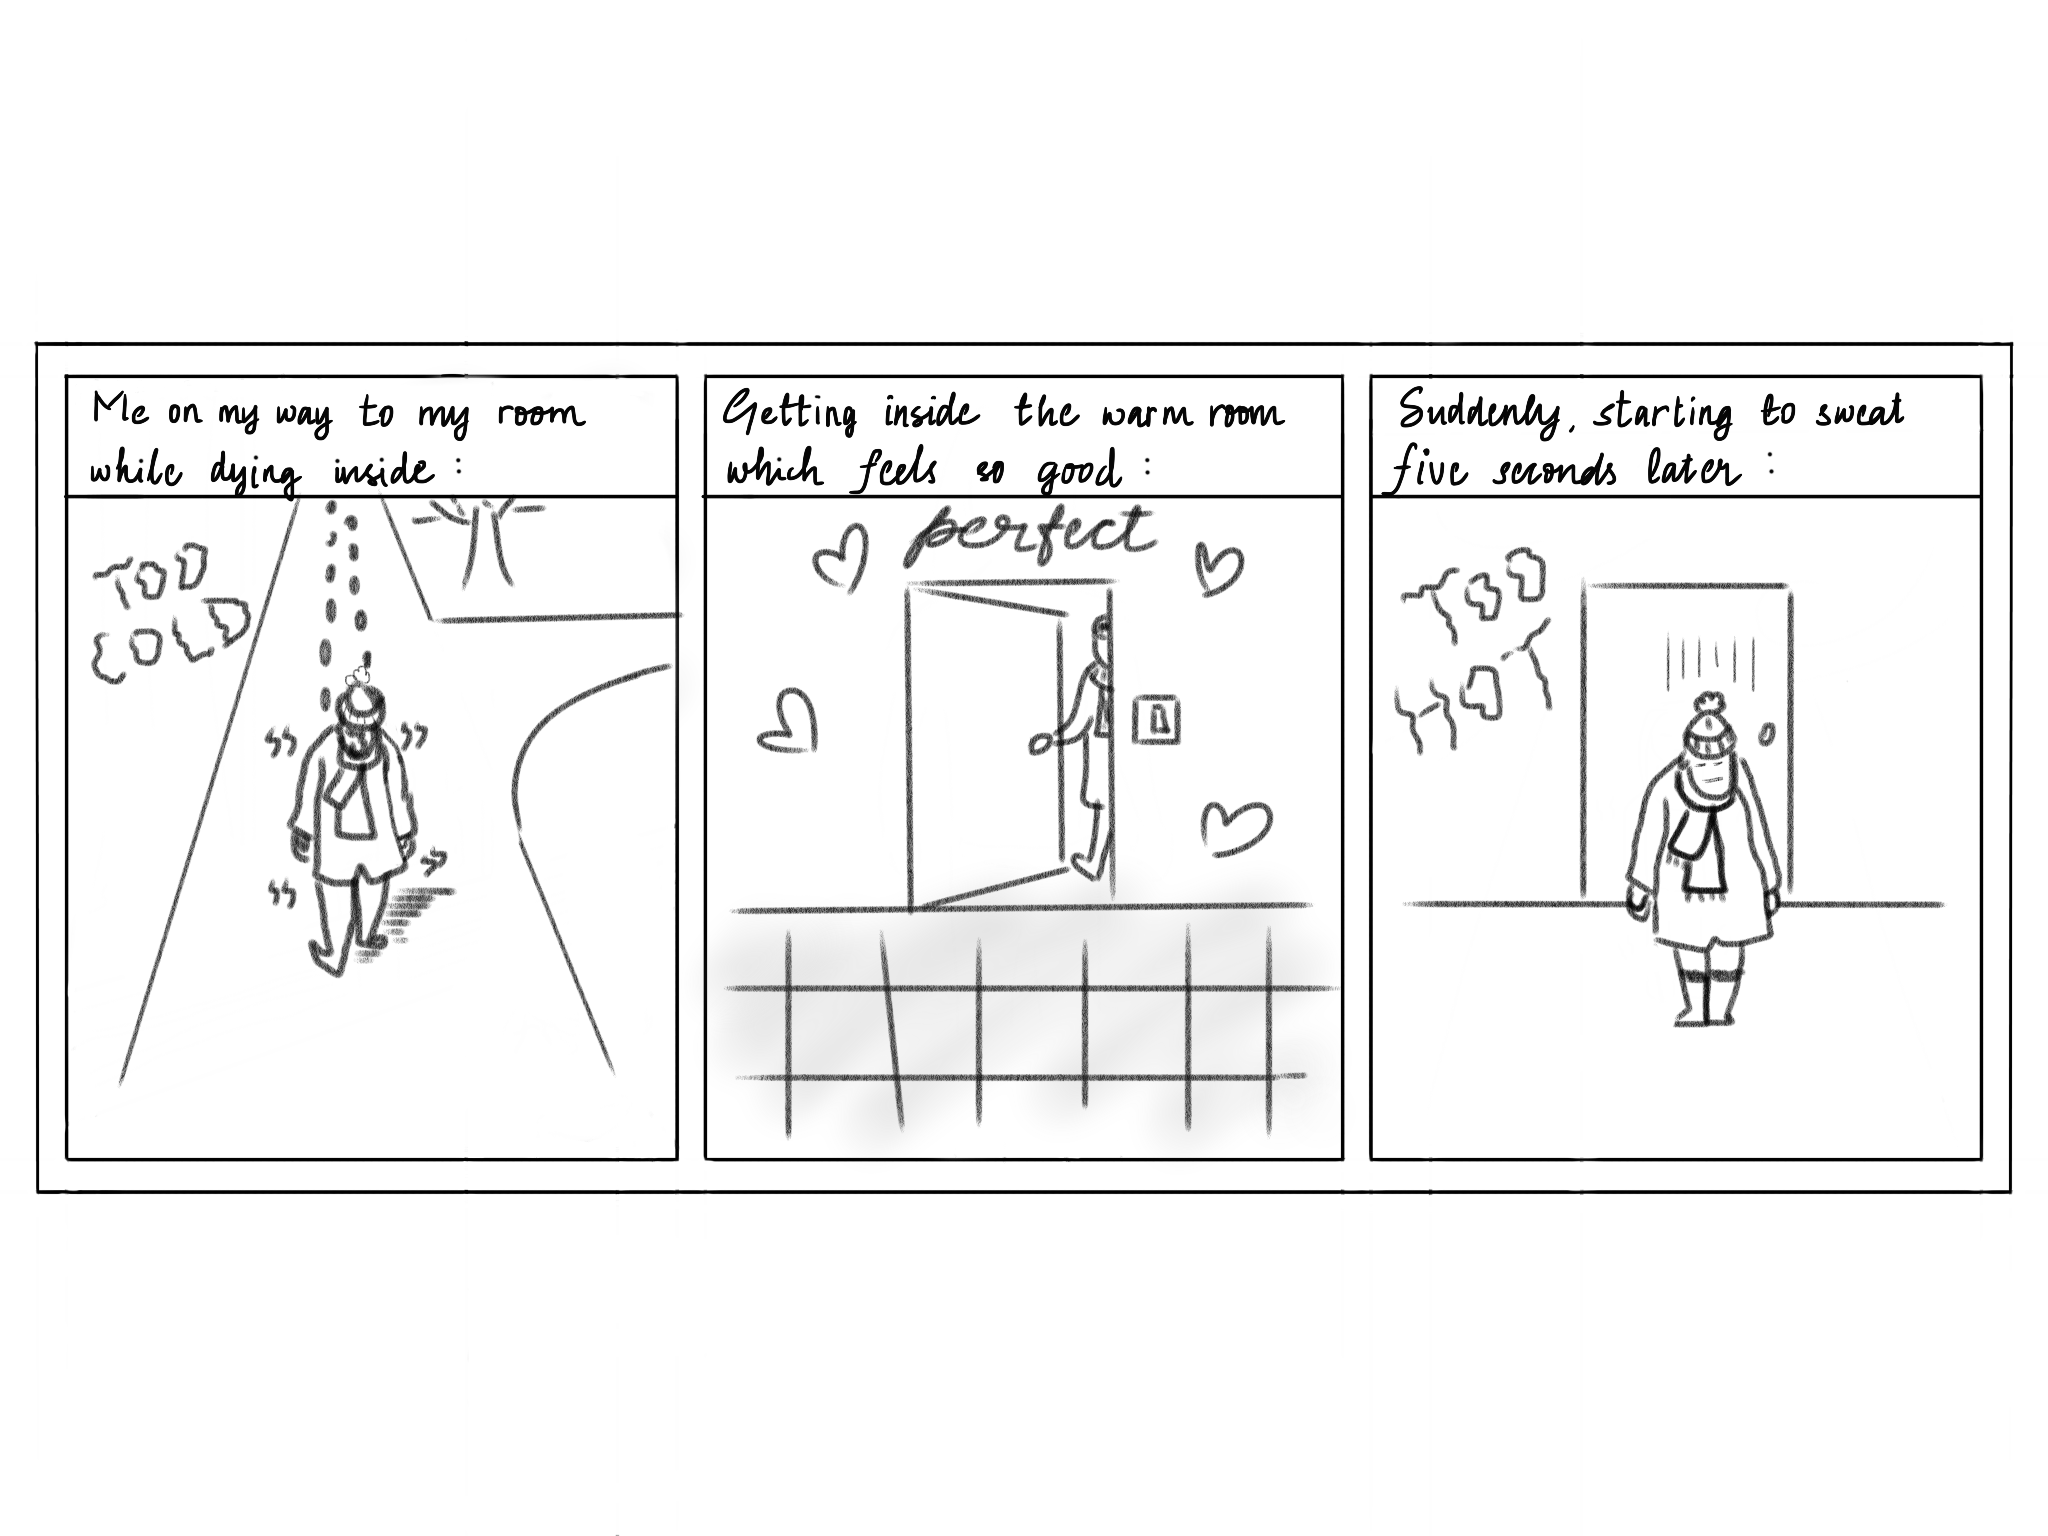 Comic of person walking outside being cold and then going inside and being to hot